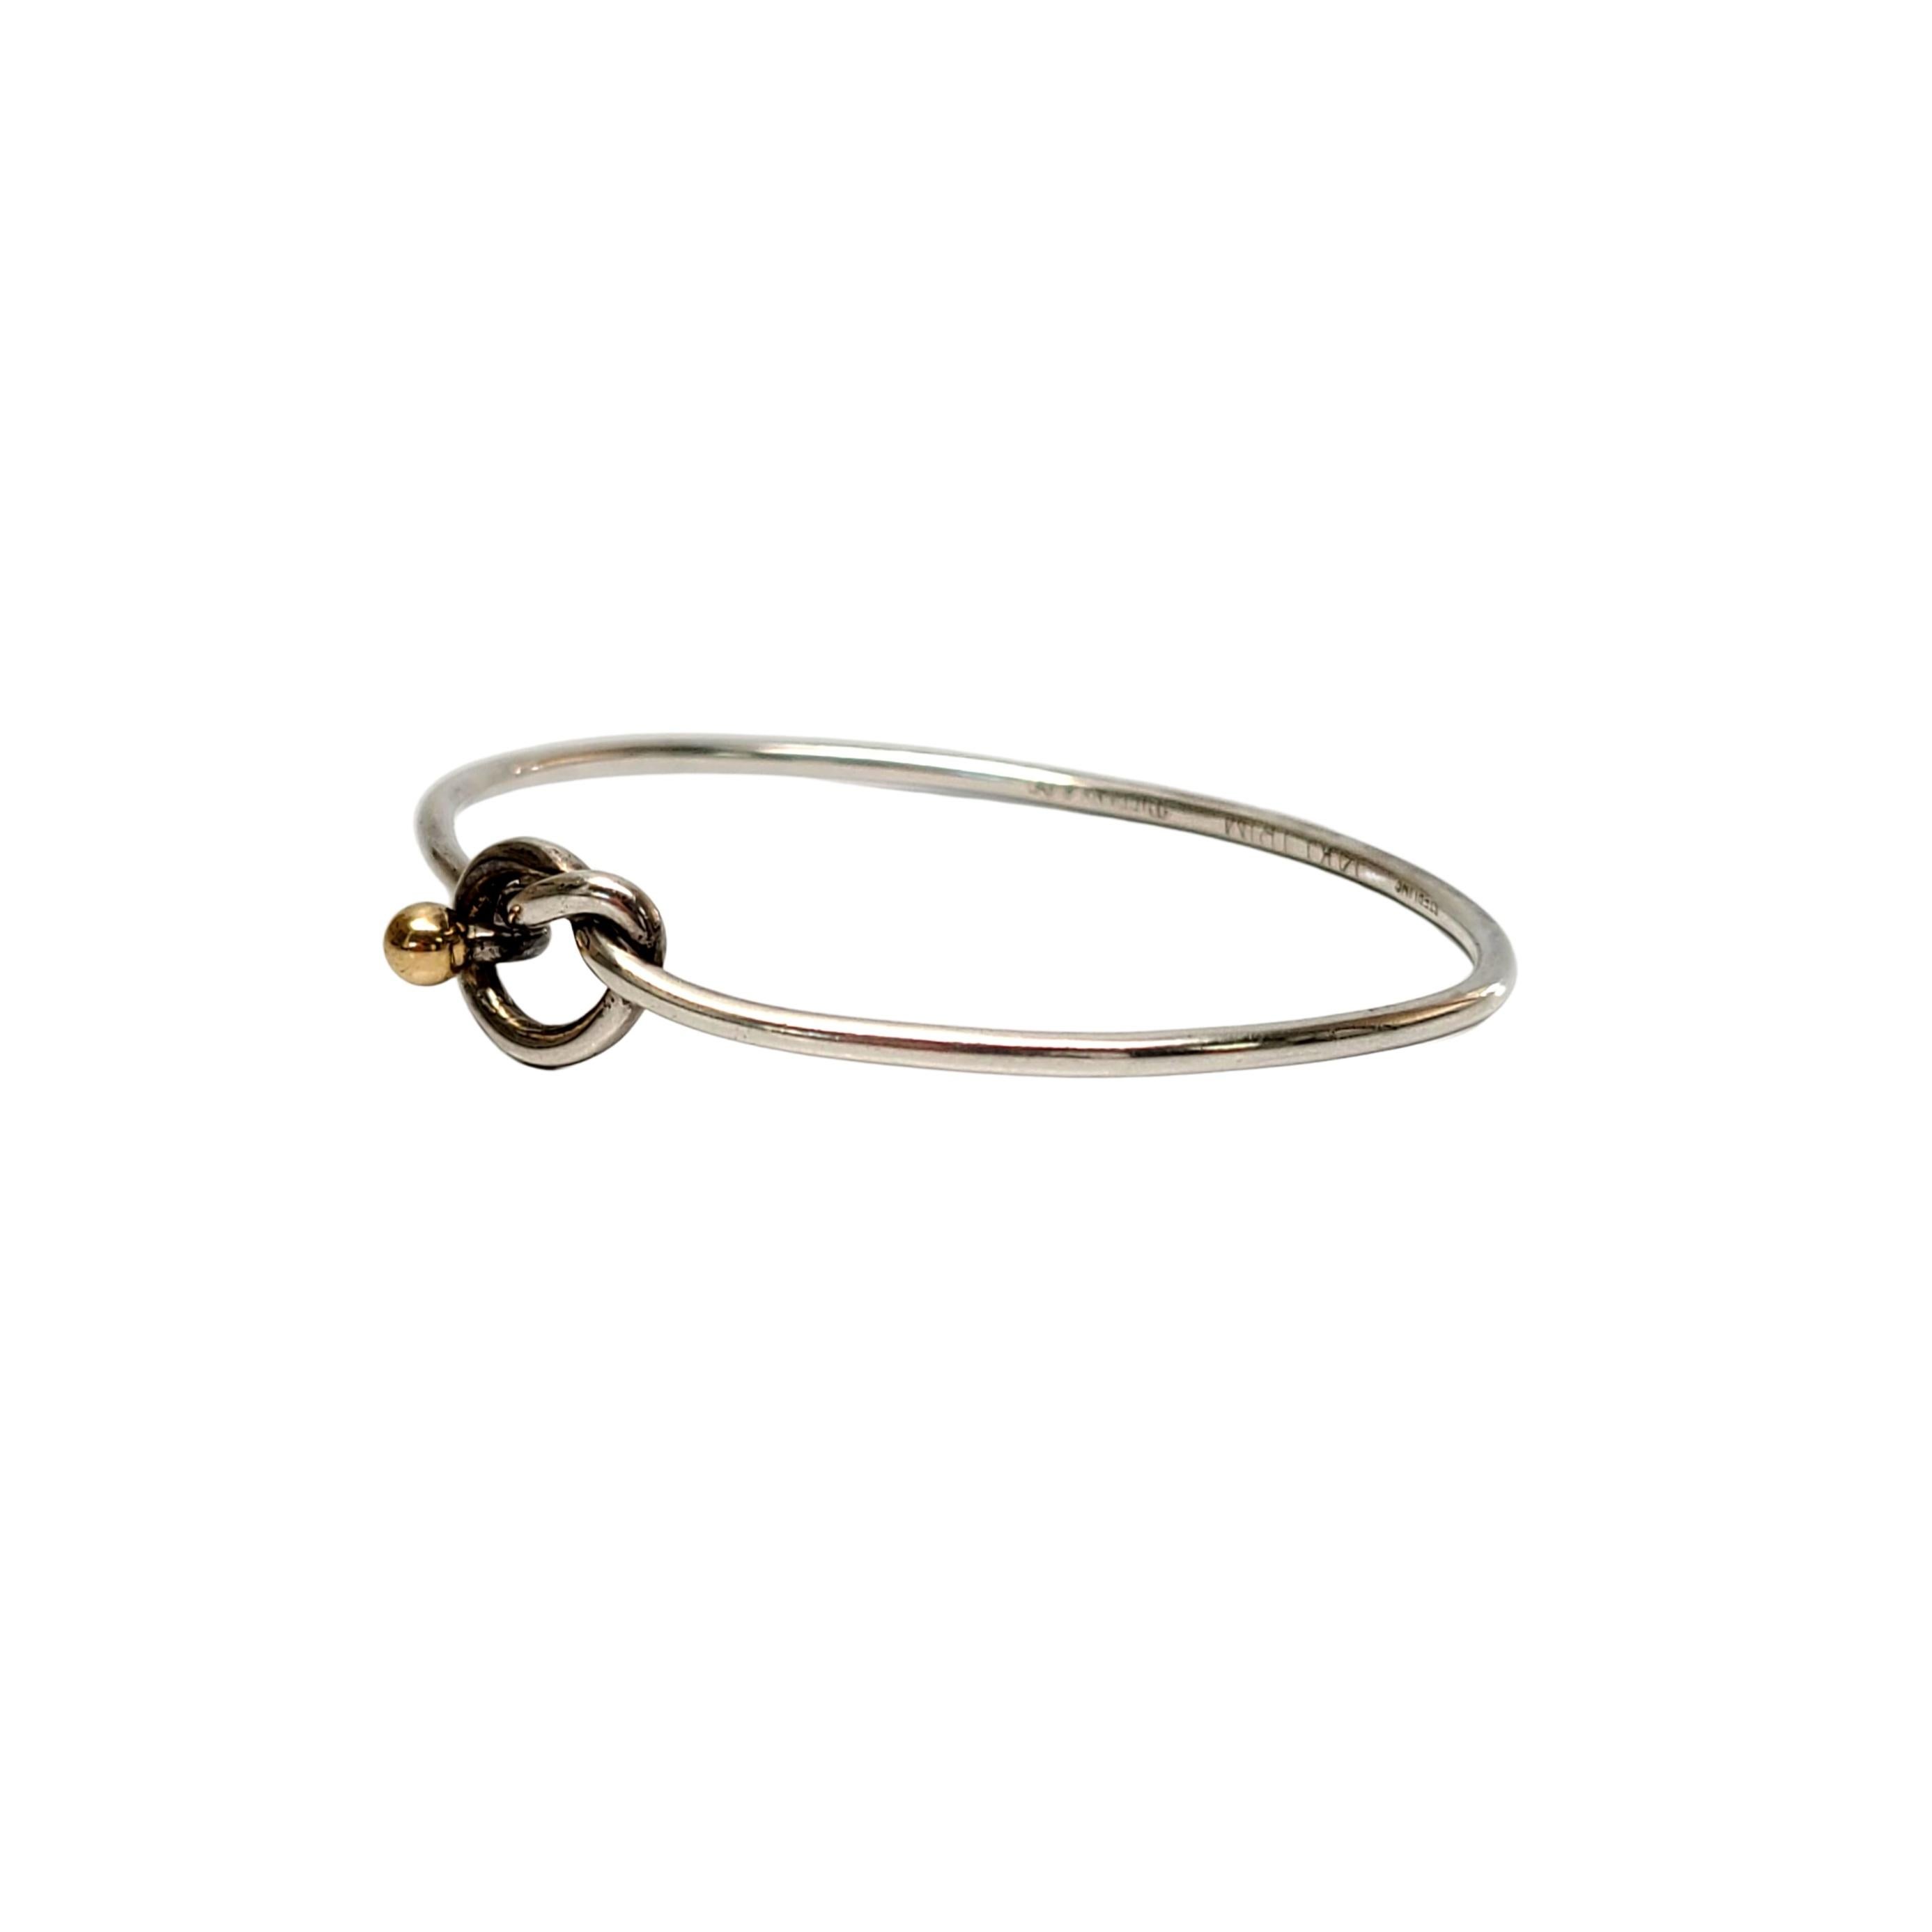 Tiffany & Co sterling silver and 14K yellow gold love knot bangle bracelet.

Authentic Tiffany sterling silver bracelet, 14K yellow gold accent beads in an interlocking knot closure. Tiffany pouch and box not included.

Measures approx 6 1/4